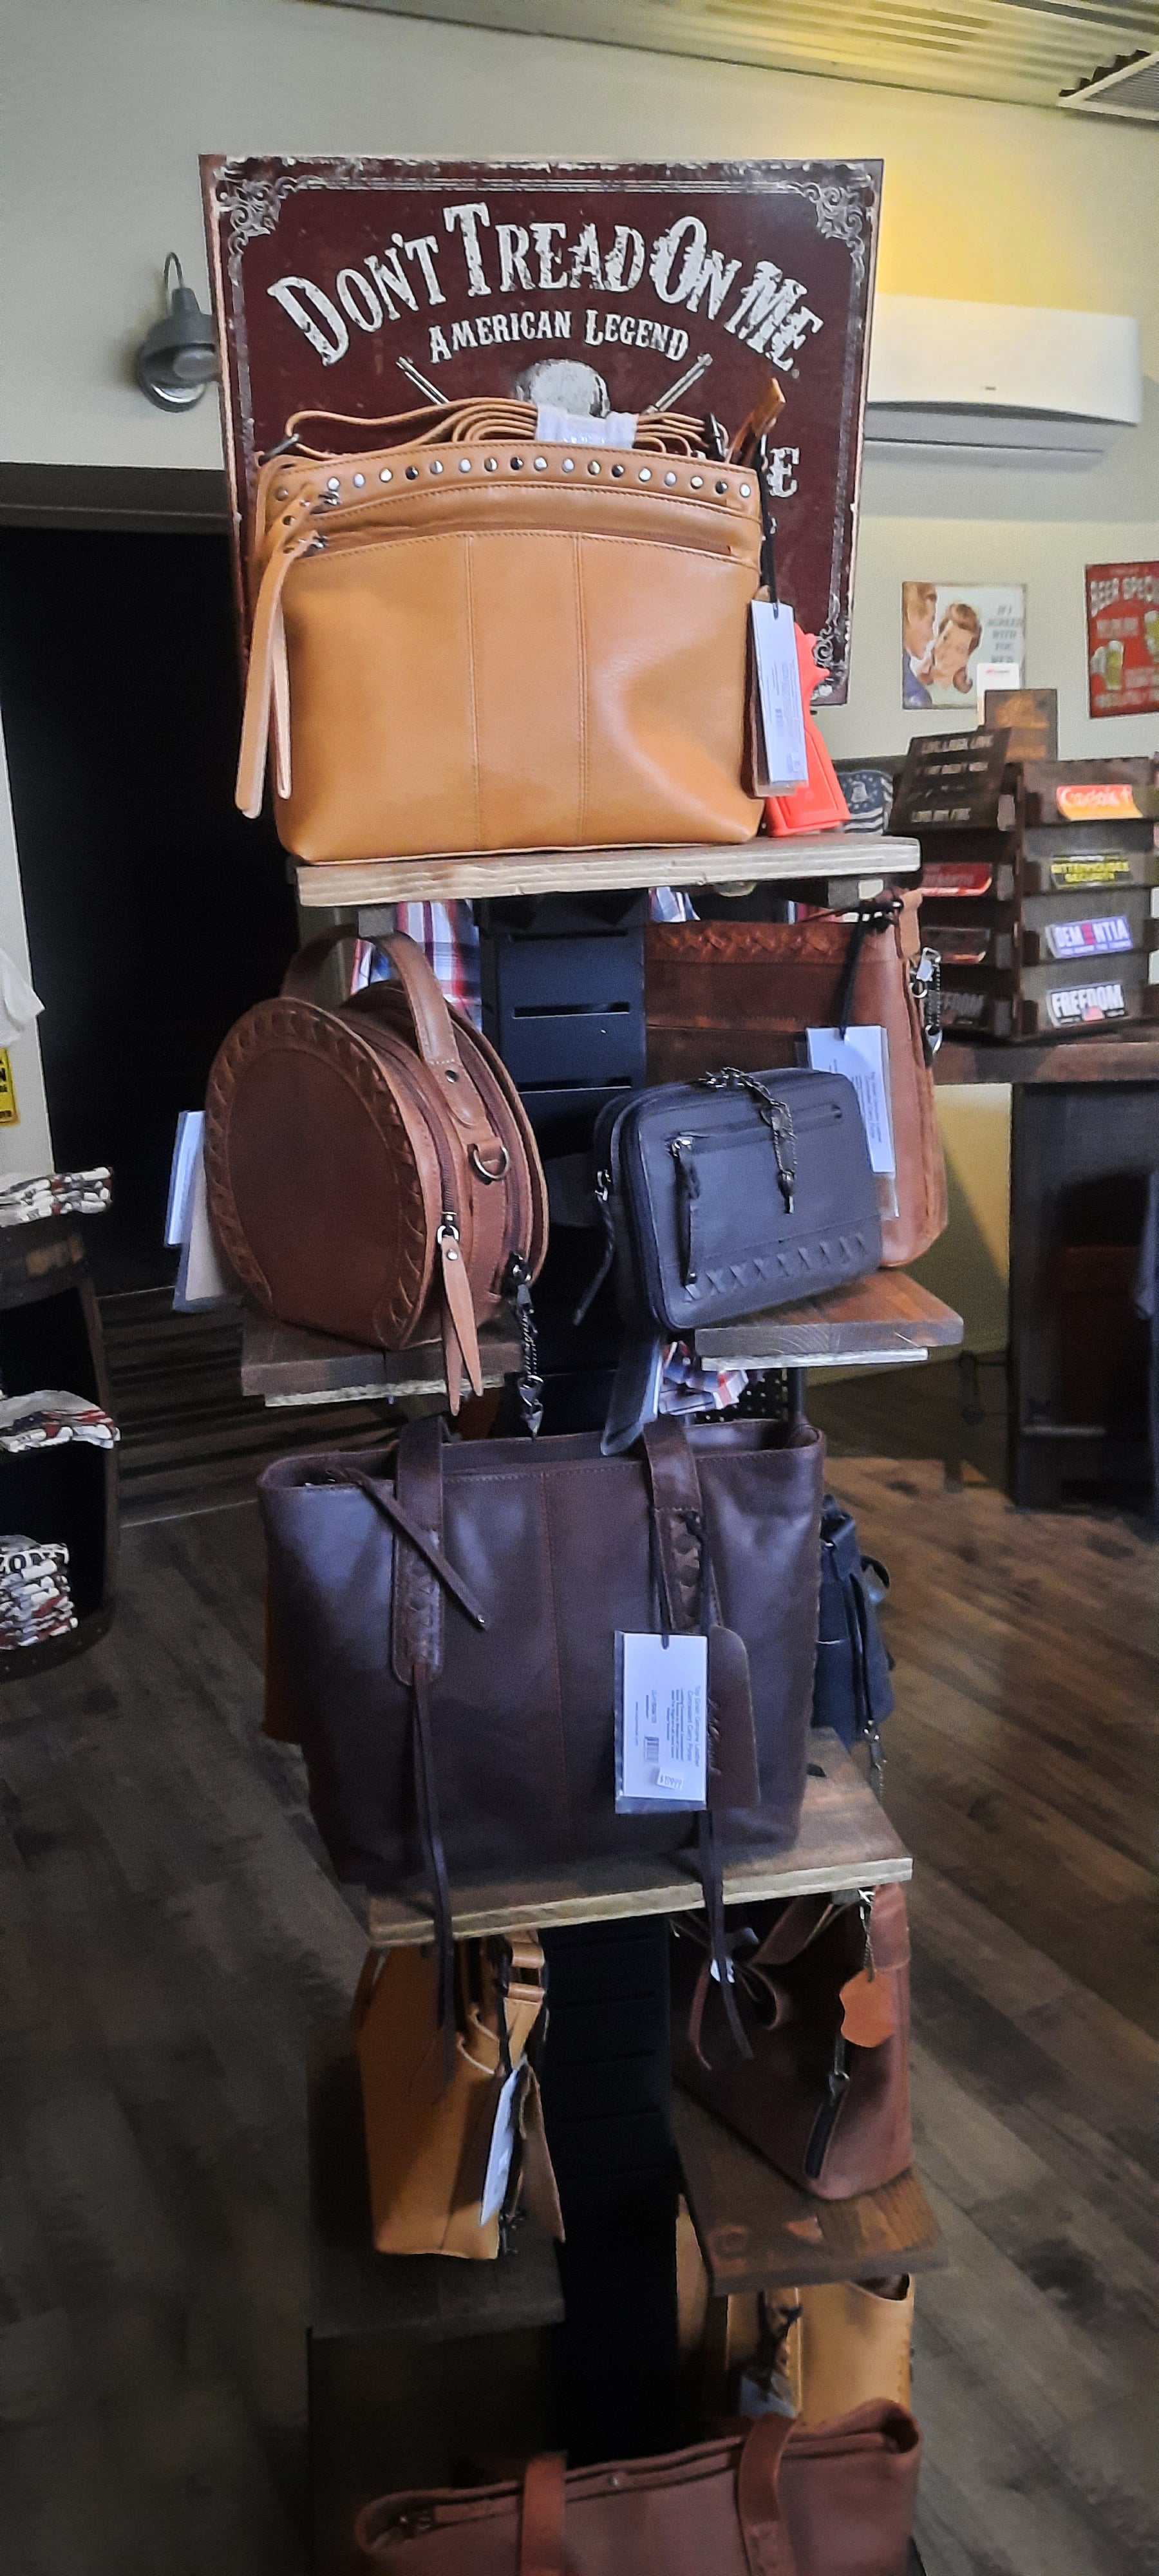 Leather conceal carry purses on display in retail store